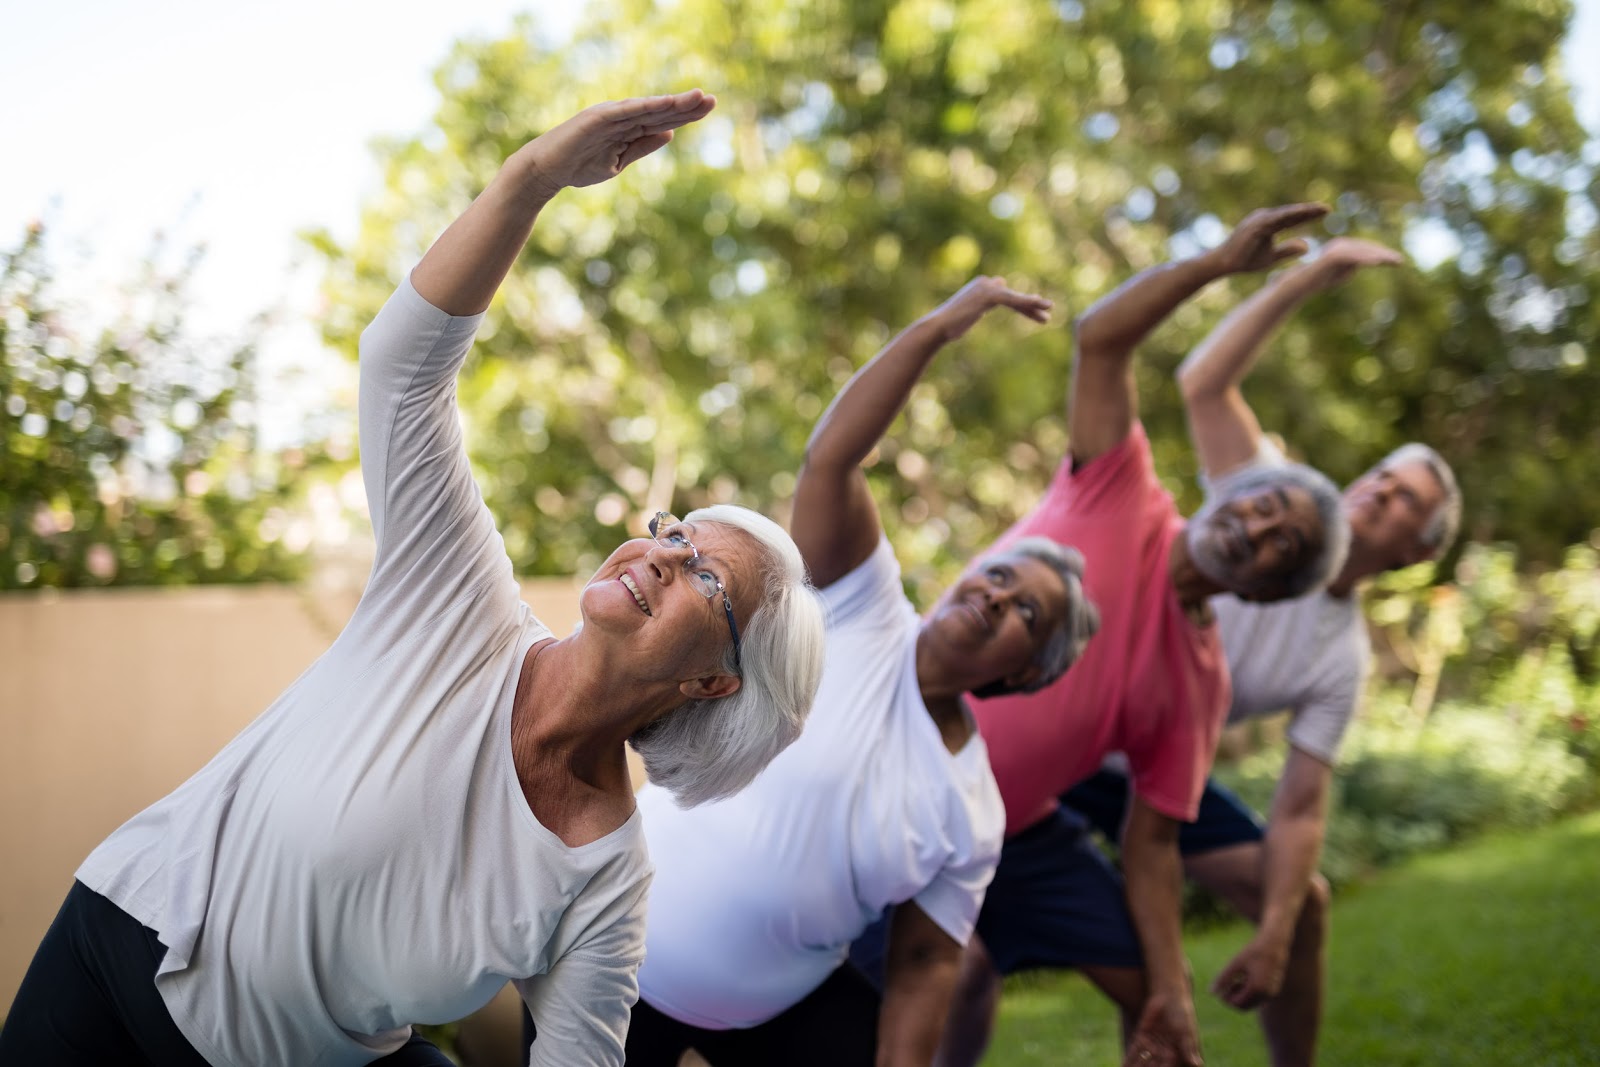 Senior people looking up while exercising with arms raised at park